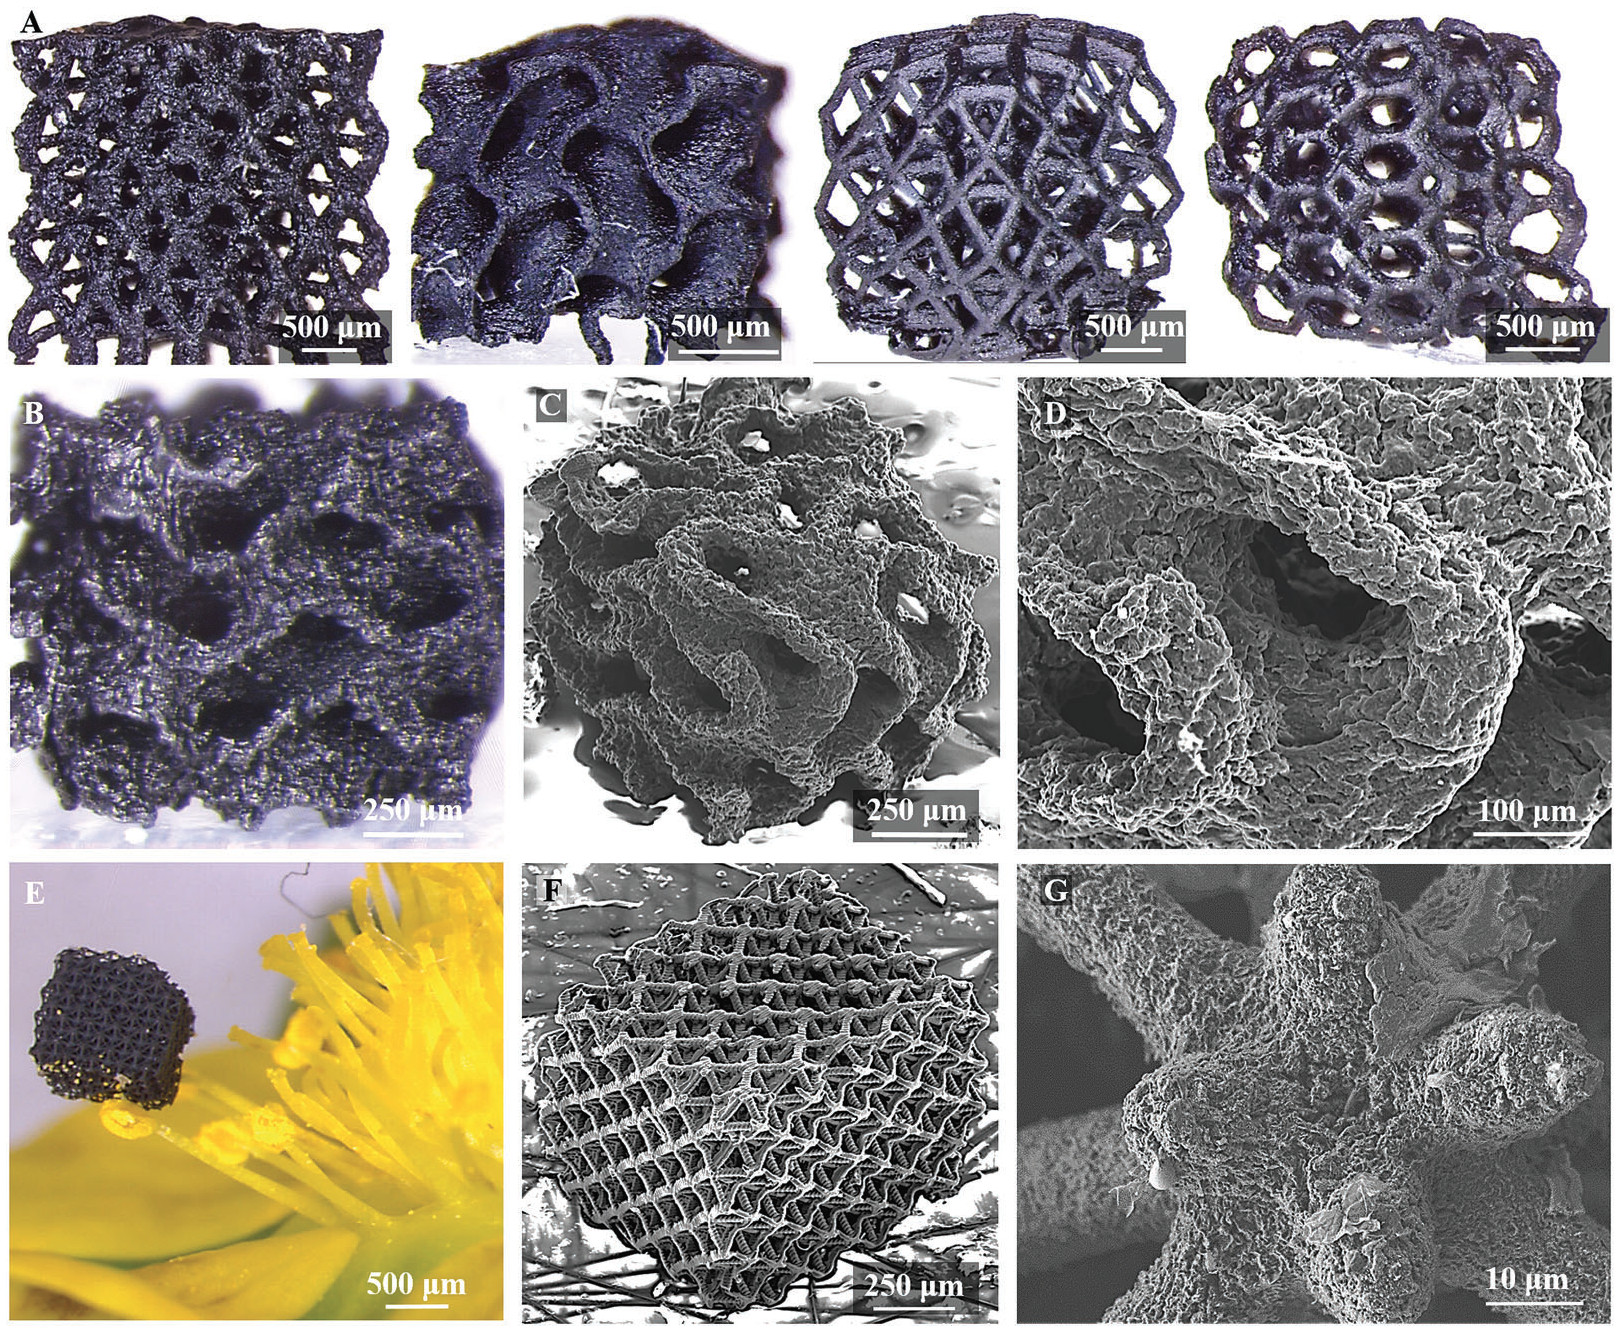 Lattice "trusses" and gyroidal 3D printed graphene made in the Virginia Tech/LLNL study. Image via Materials Horizons